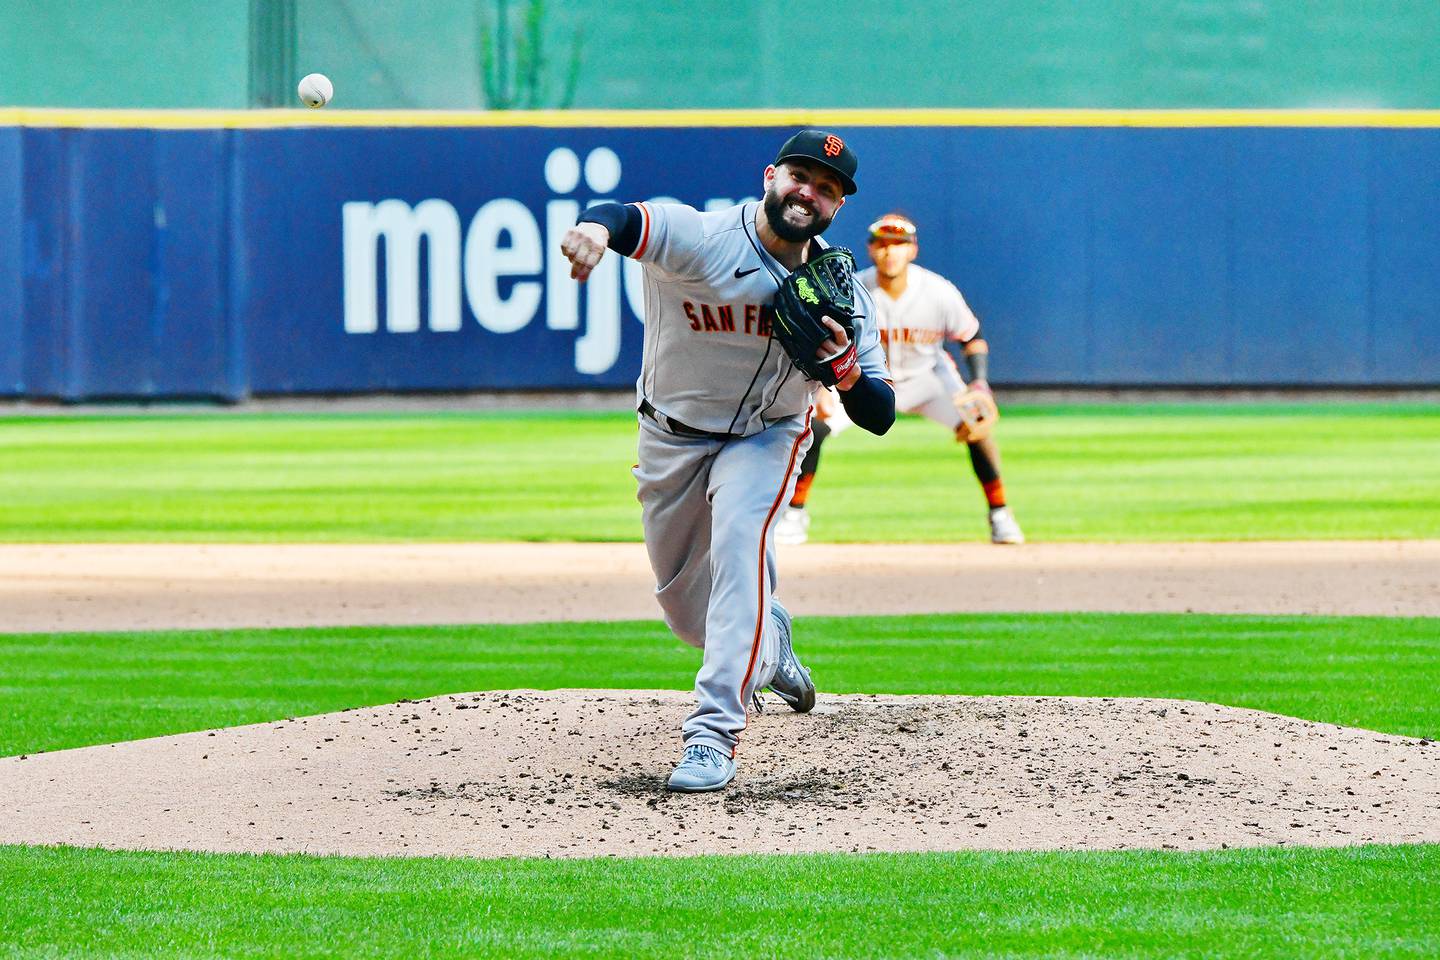 Giants starter Jakob Junis pitches against the Brewers on Thursday, Sept. 8, 2022. The Rock Falls native has had a solid season in his first year with San Francisco.